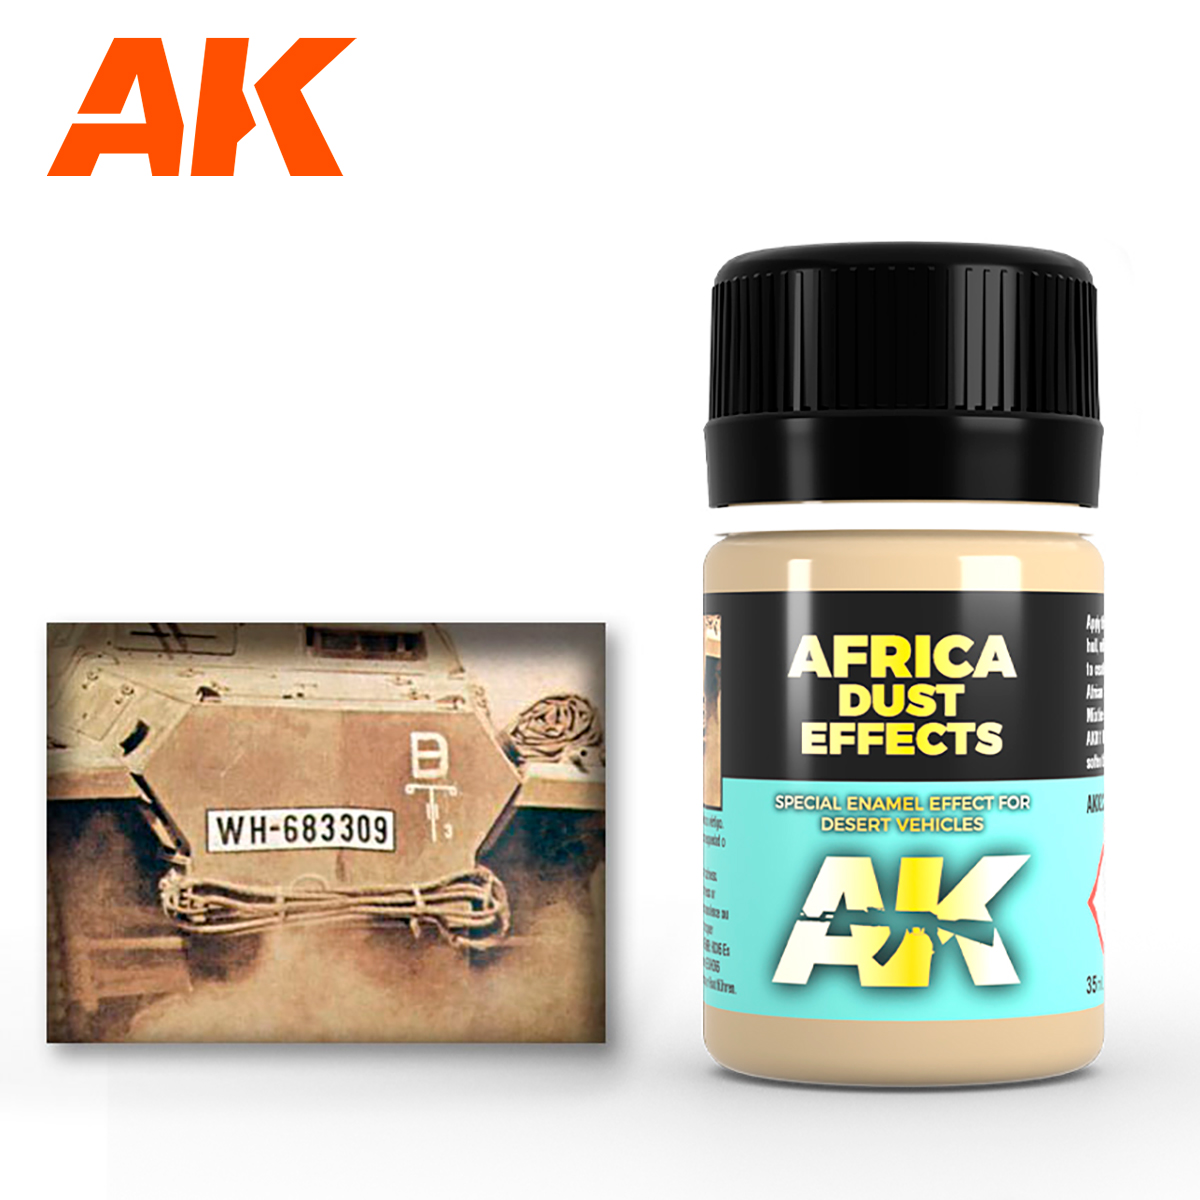 Africa Dust Effects